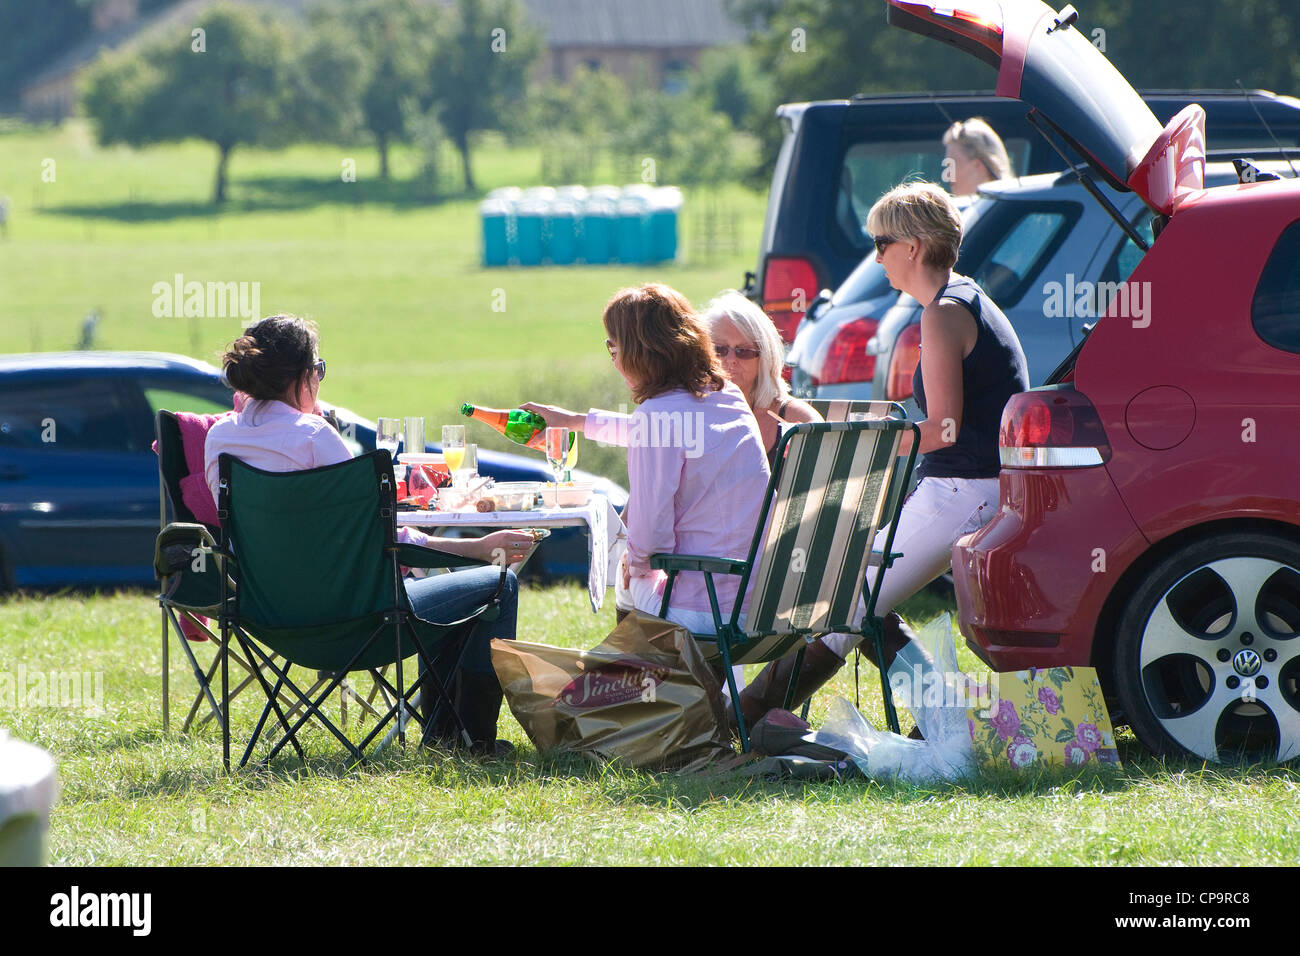 picnic in carpark at sporting event Stock Photo